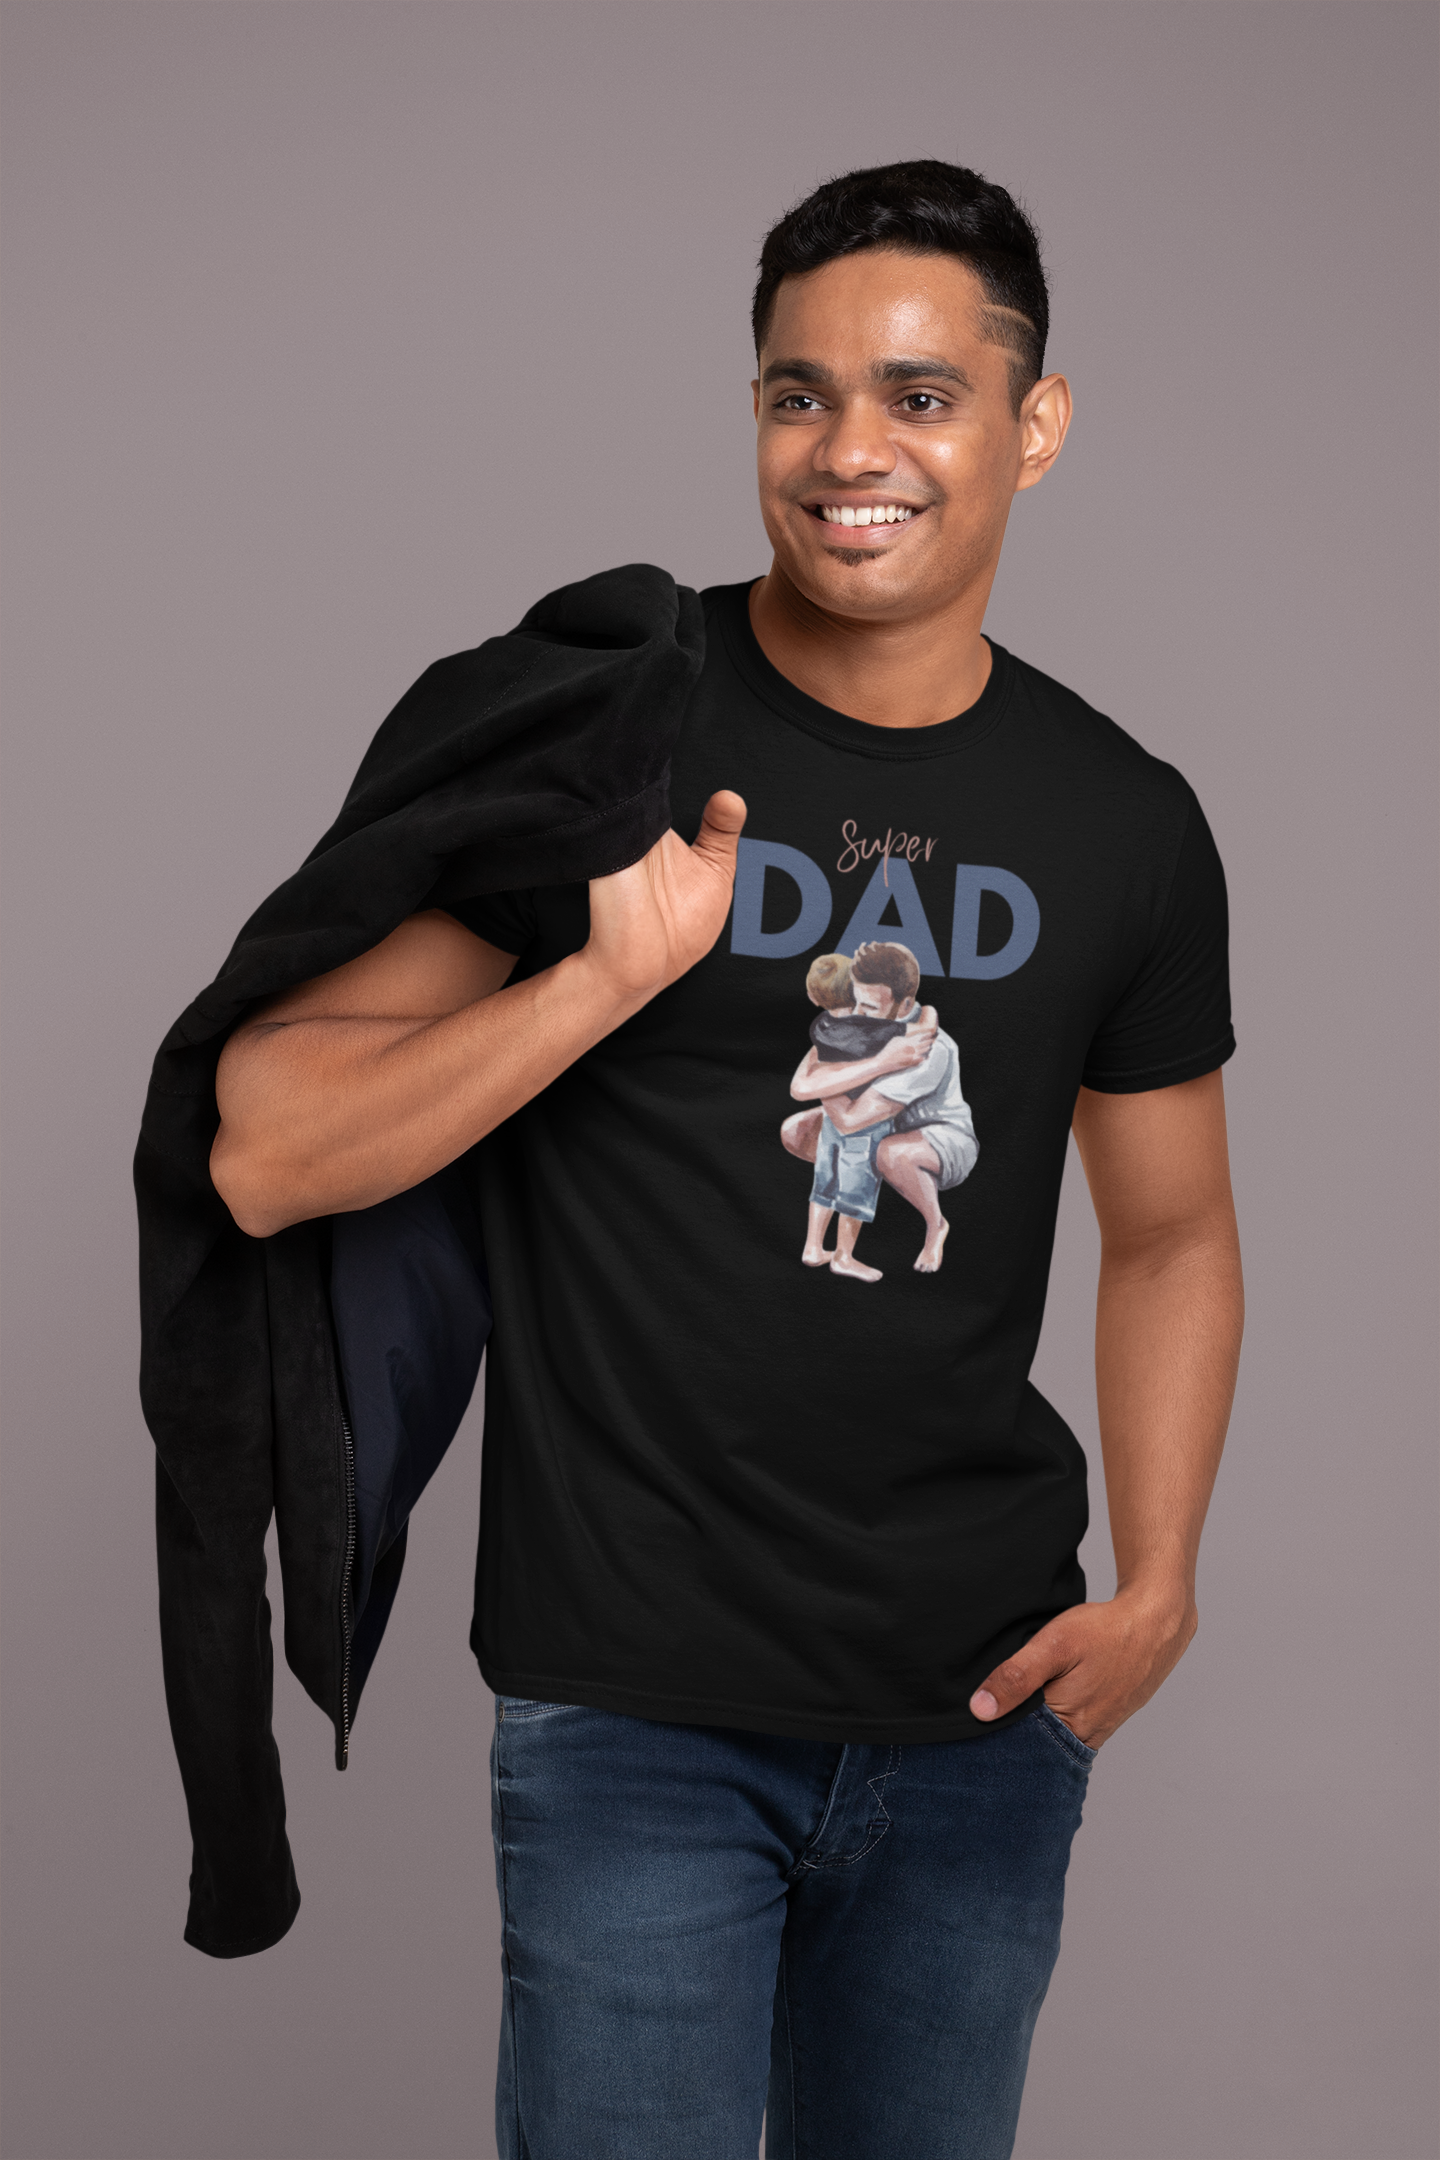 Super Dad Vibes: Premium Cotton Tee for the Ultimate Father